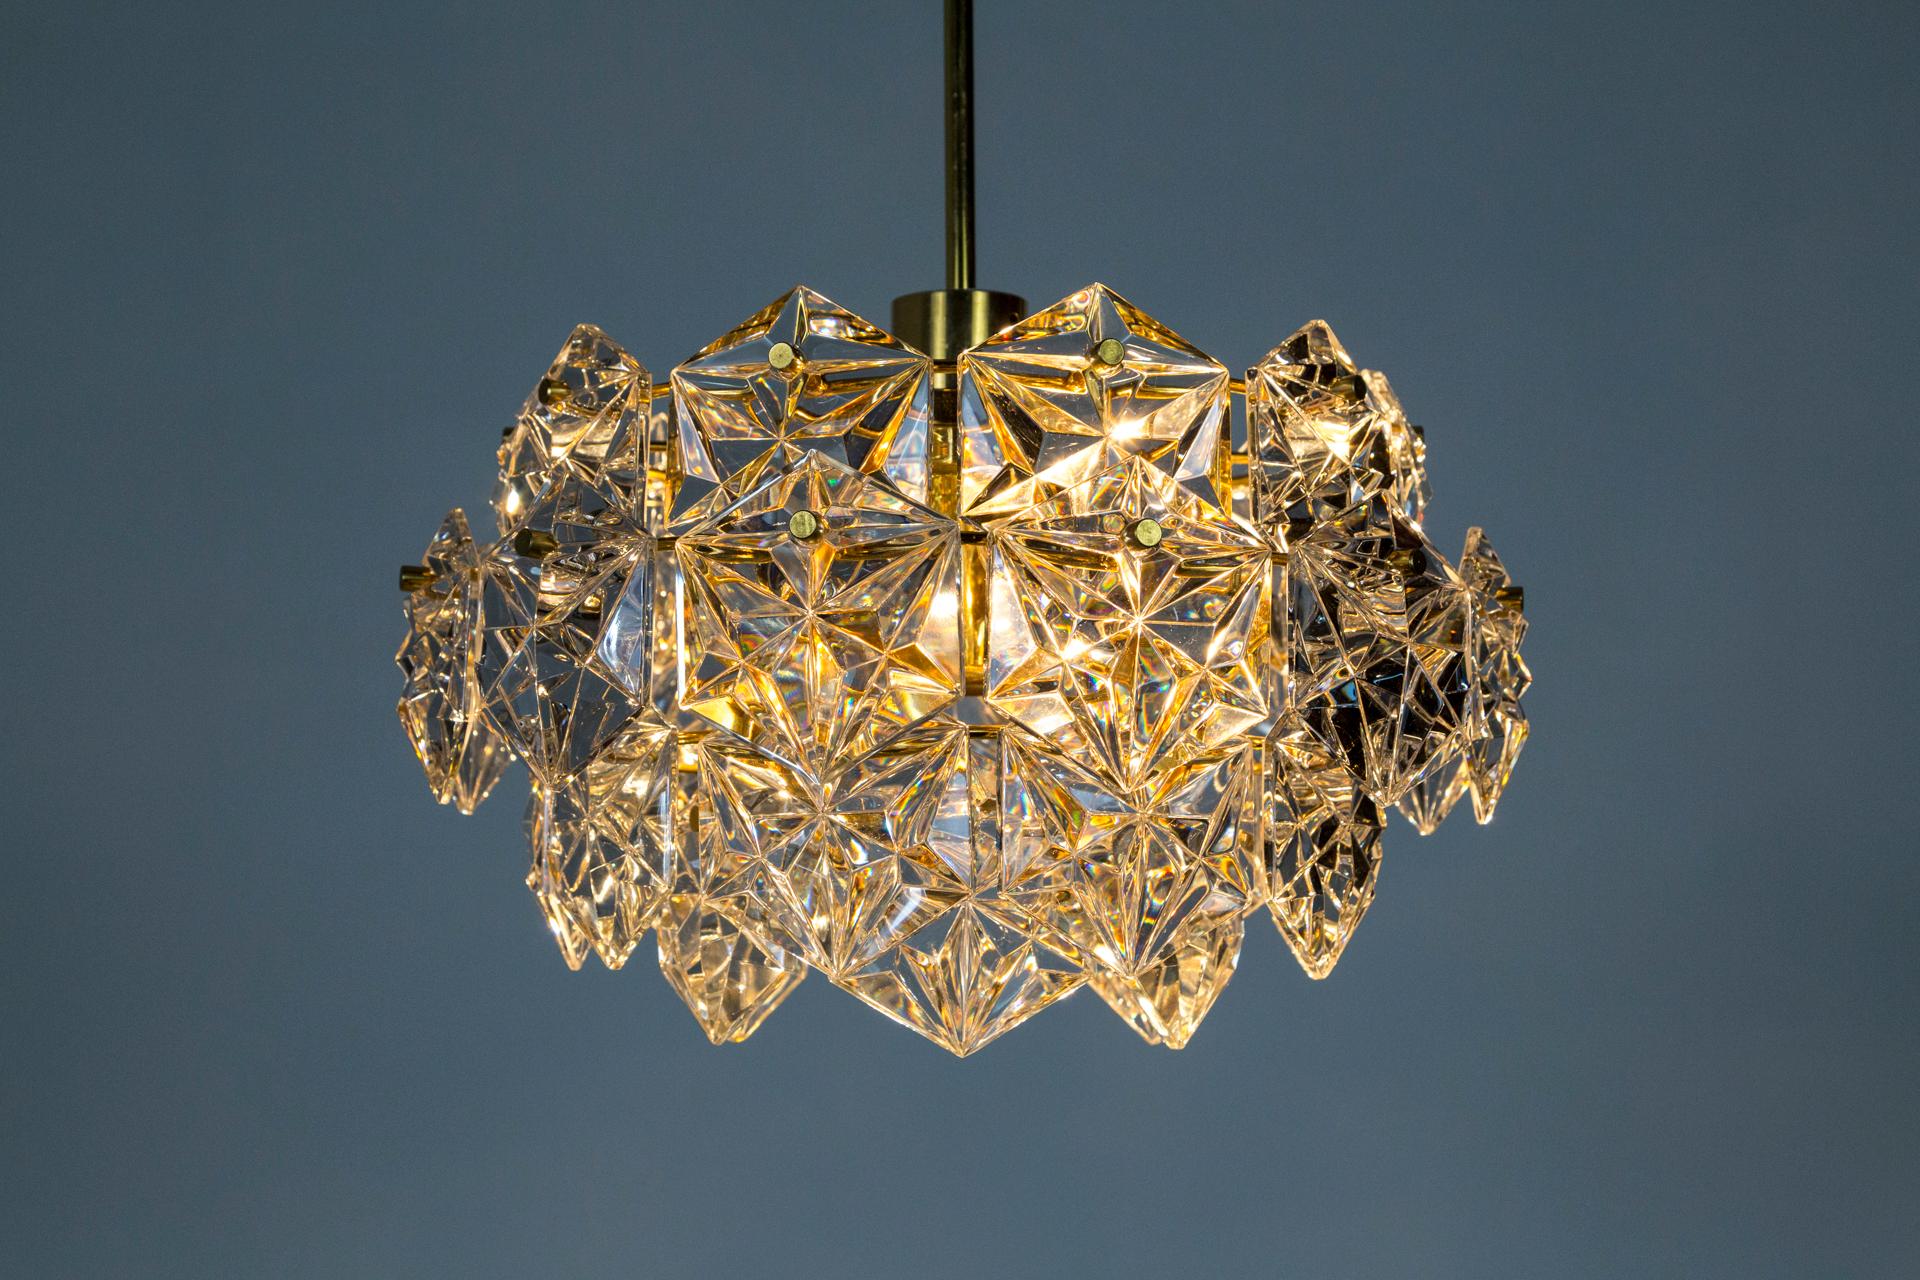 A vintage, Kinkeldey pendant made of a cluster of 4-tiers of chunky, gem-like crystal glass, with gold-plated brass hardware. A sparkling appearance. Made in Germany in the 1960s. Measures: 29.5